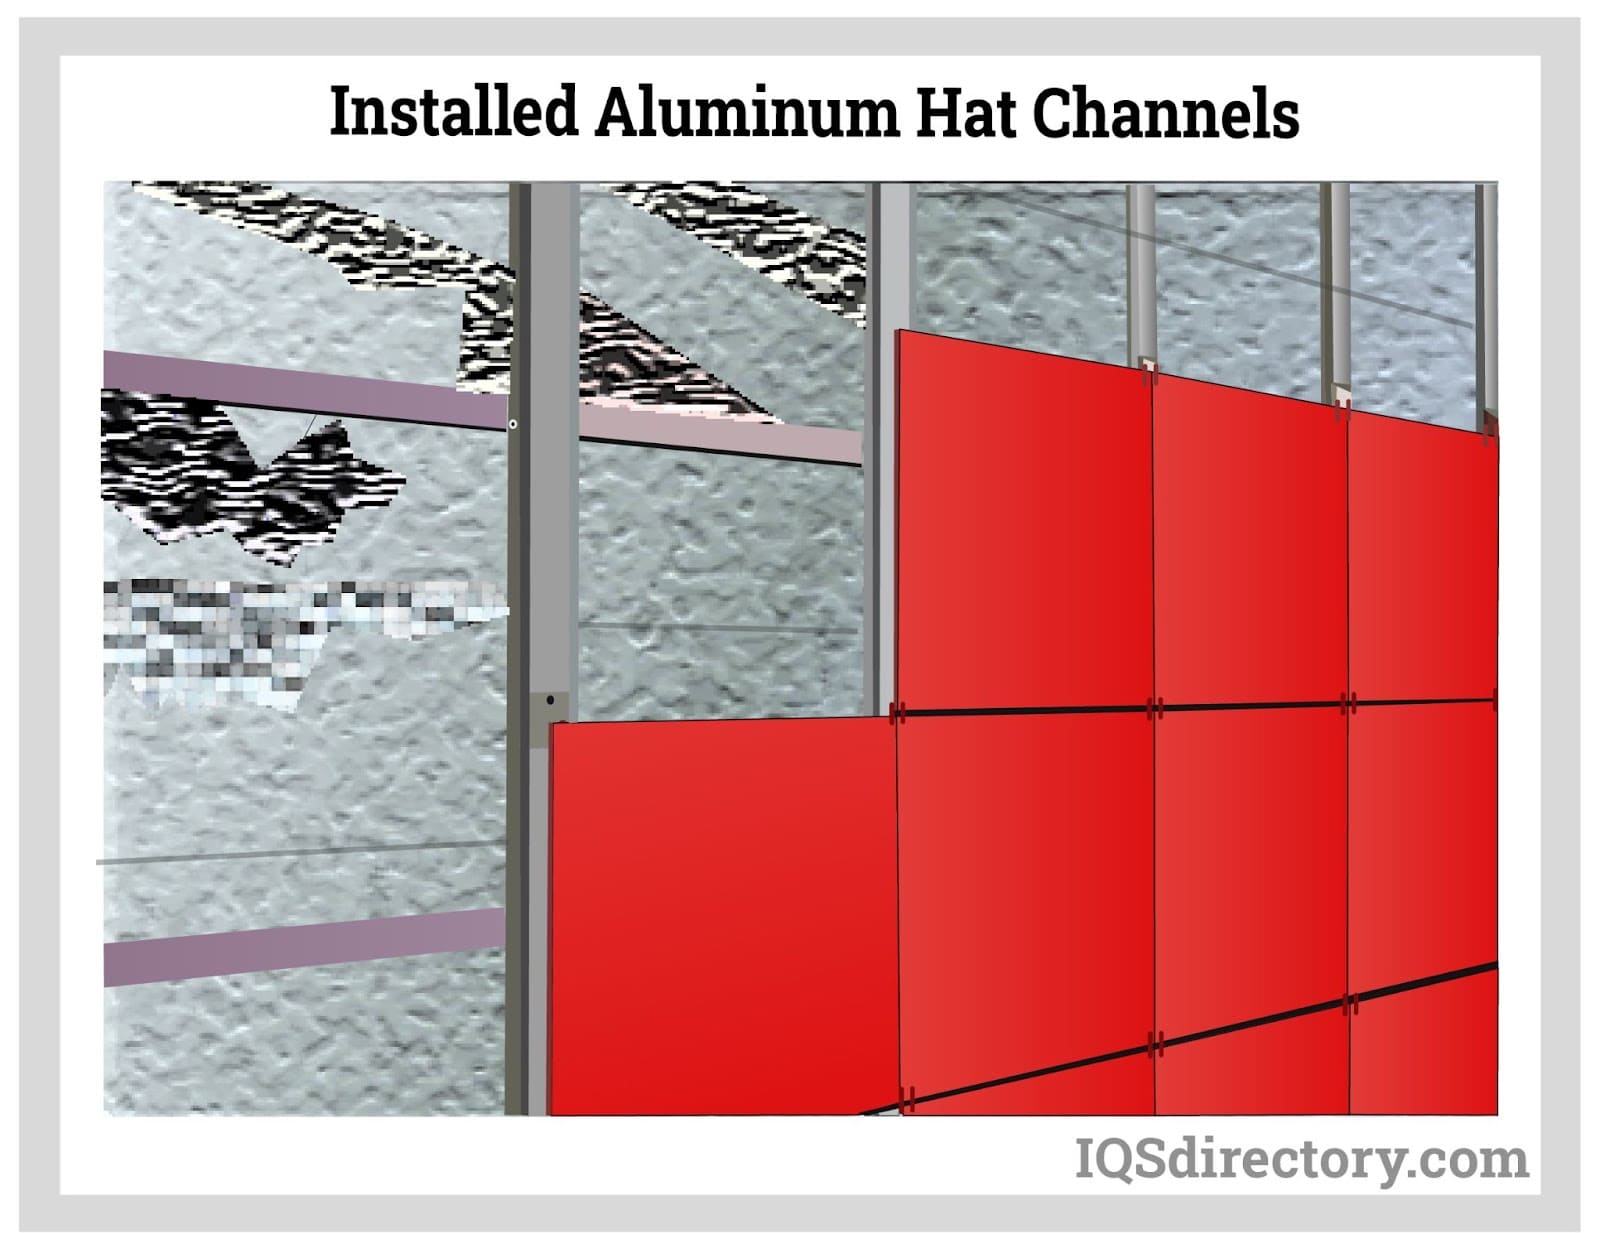 Installed Aluminum Hat Channels